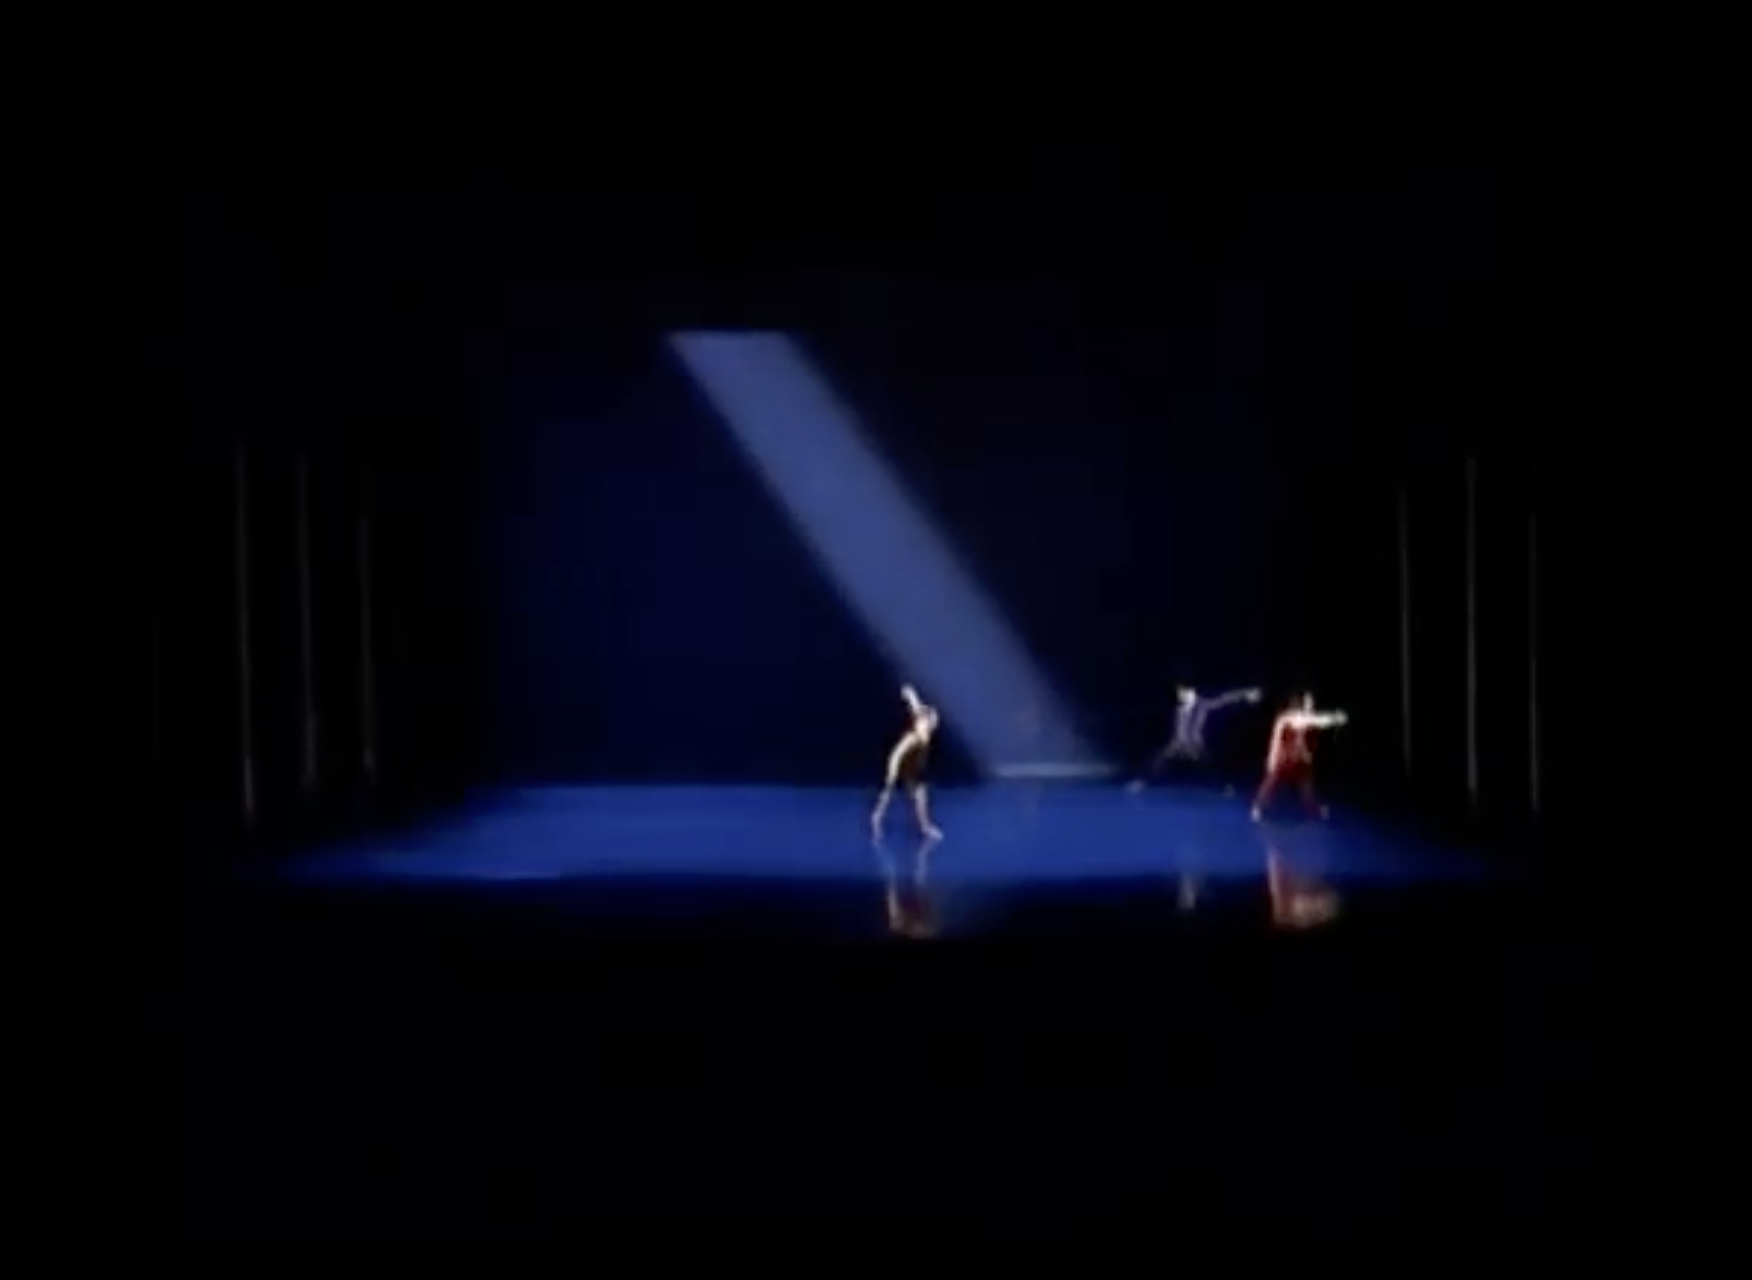 "Parallel Horizons" 2007, Digital Scenography for original creation by Dance Theatre of Ireland. Choreography: Robert Connor and Loretta Yurick